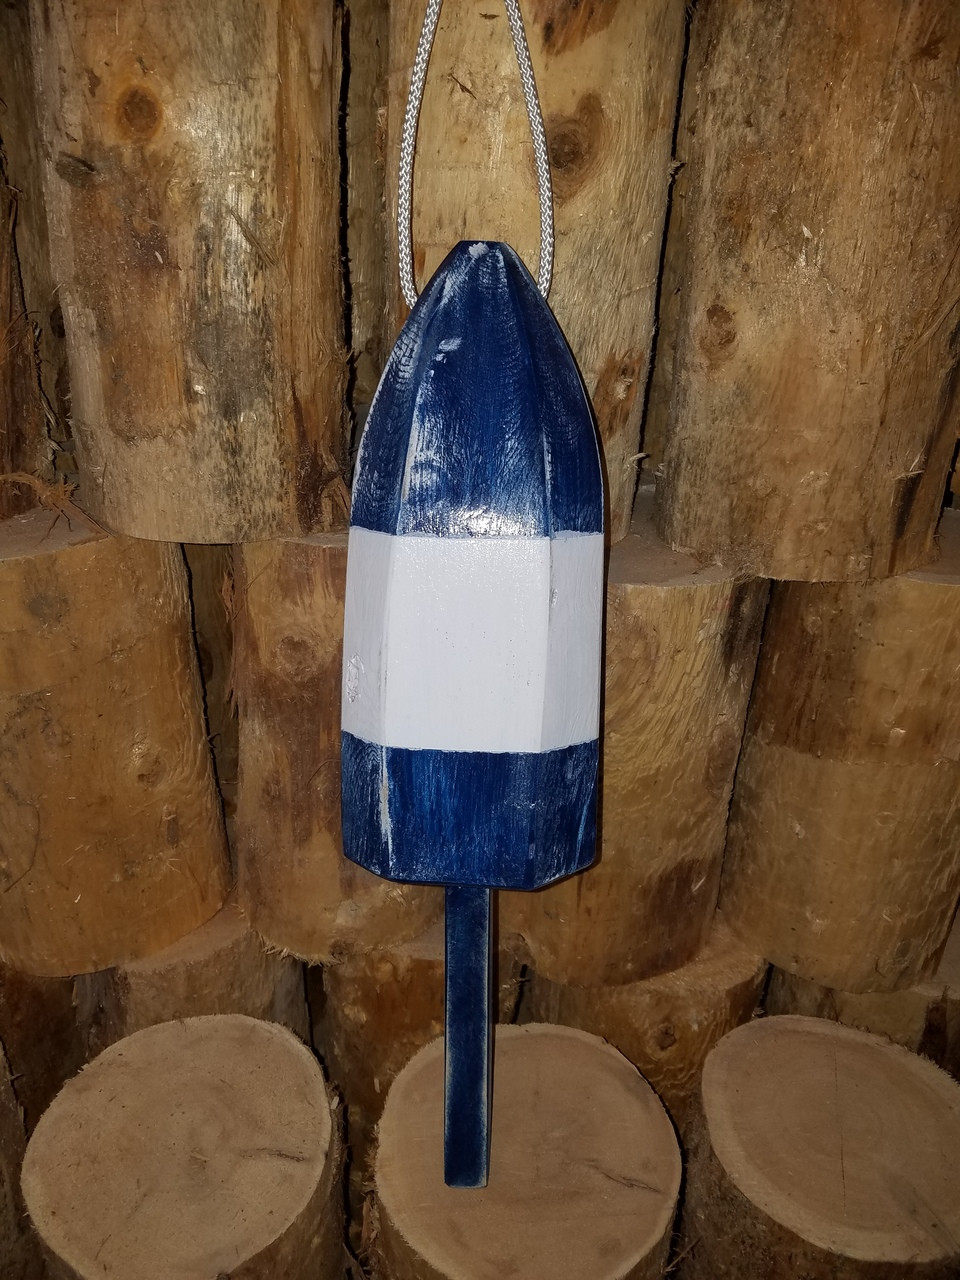 Wooden Lobster Buoy - 21" - Blue with White Band